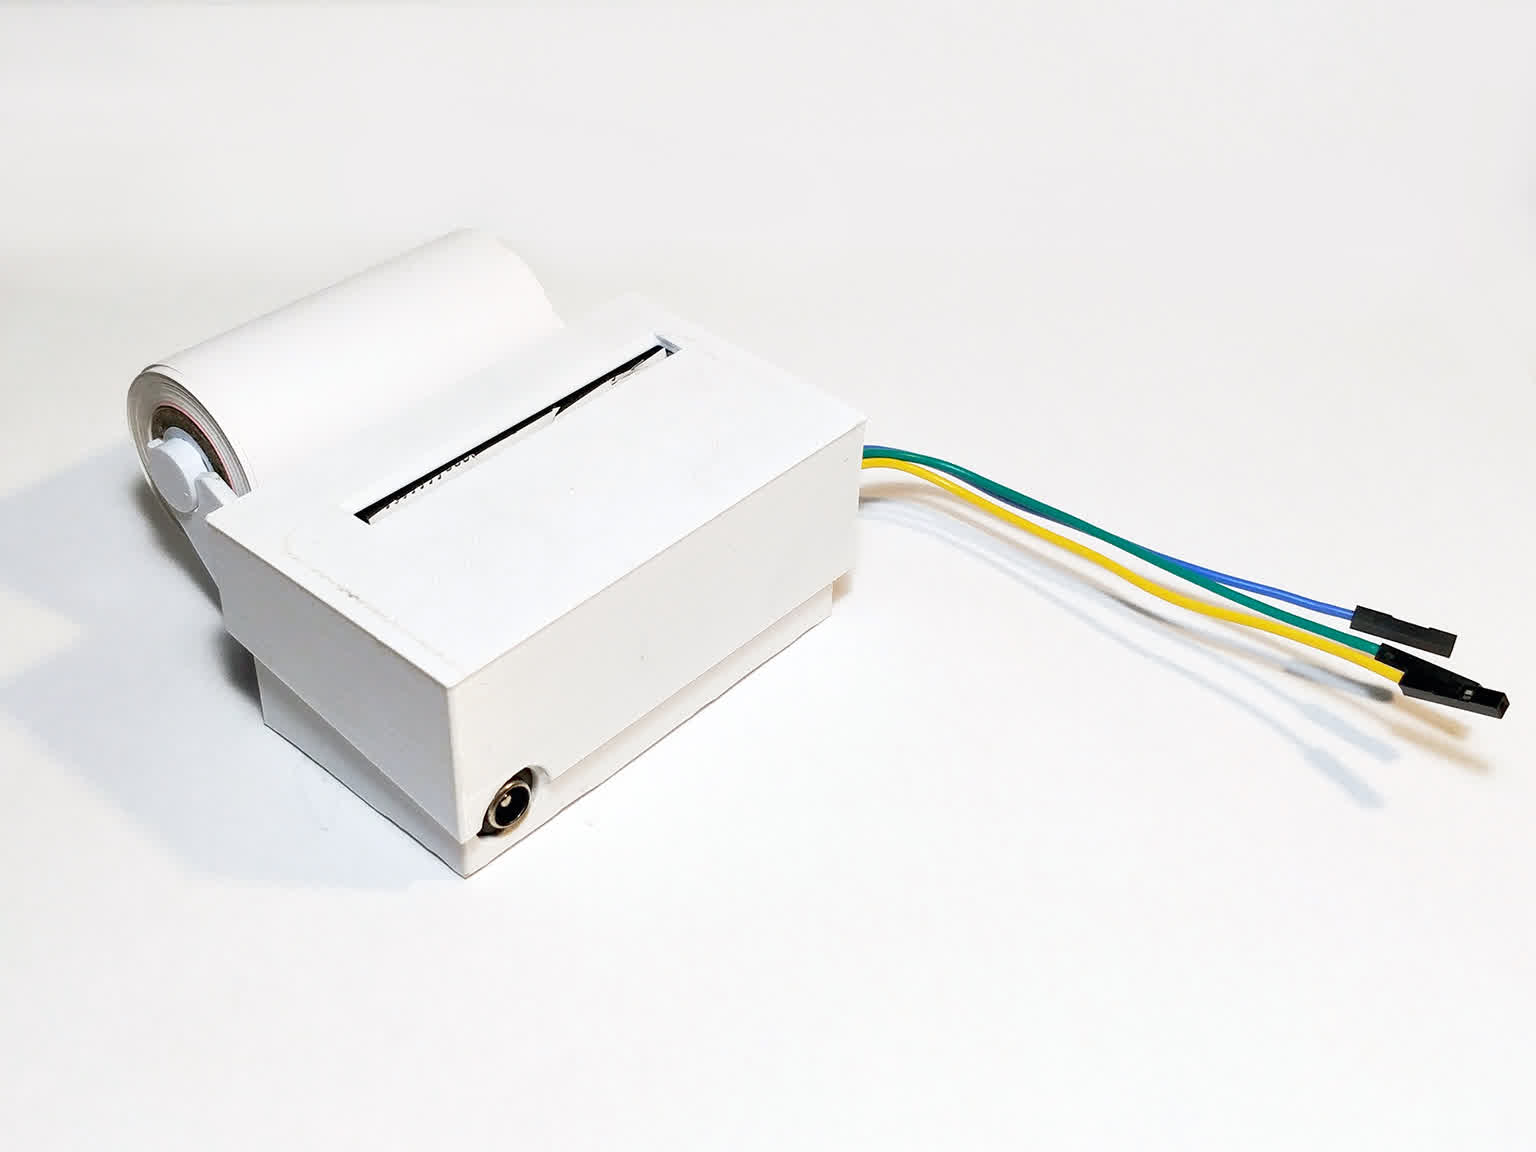 Thumbnail image: A small, white thermal printer, with a 3D printed housing